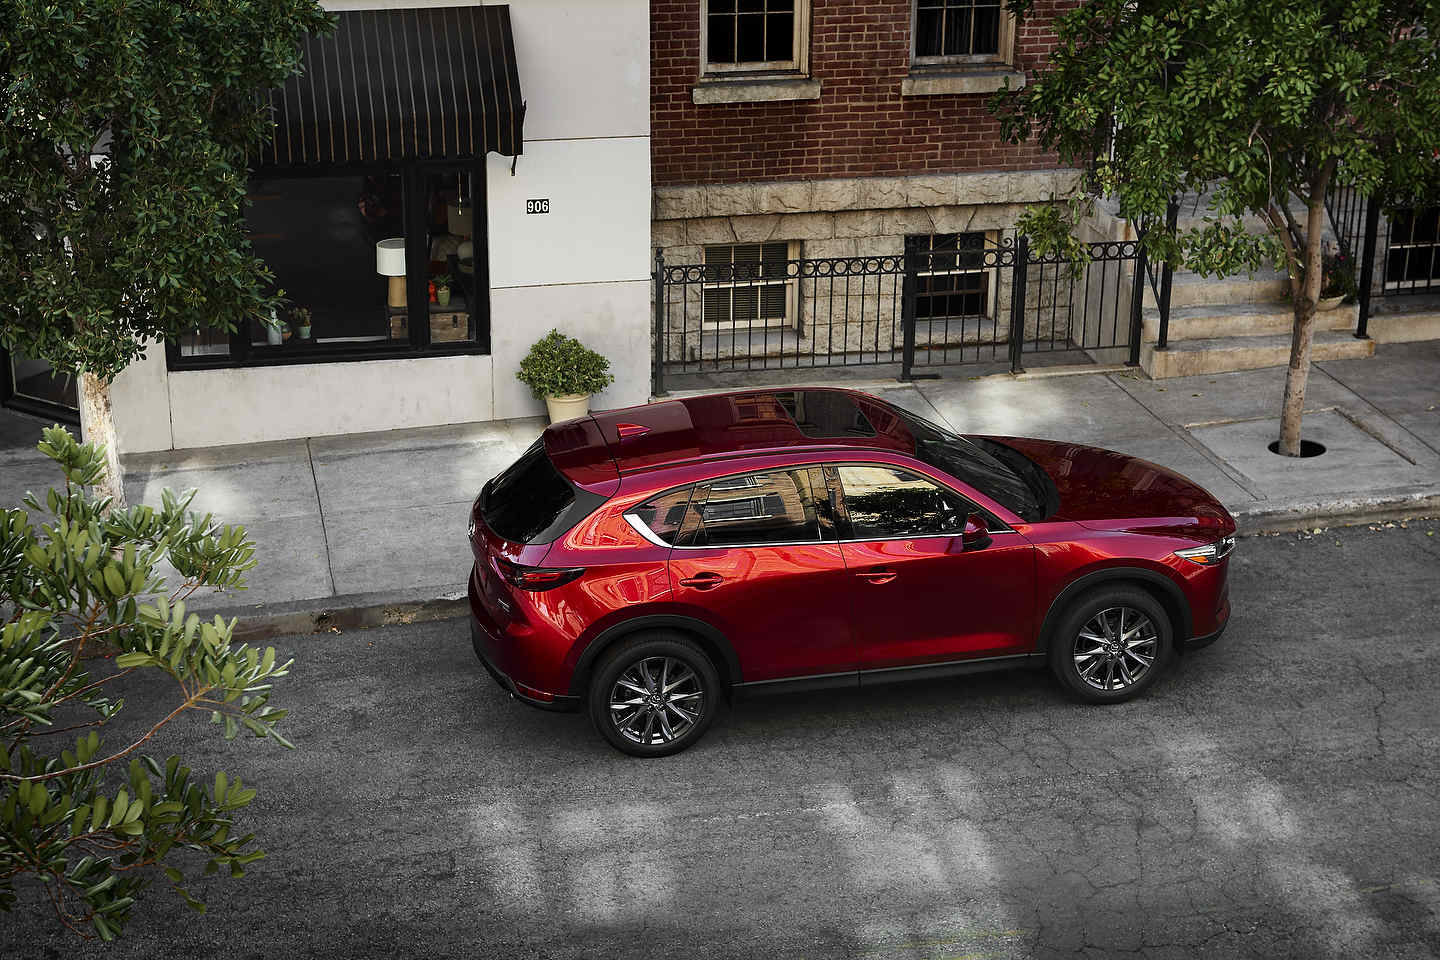 2021 Mazda CX-5: Lots of Fun with Fuel Economy To Boot